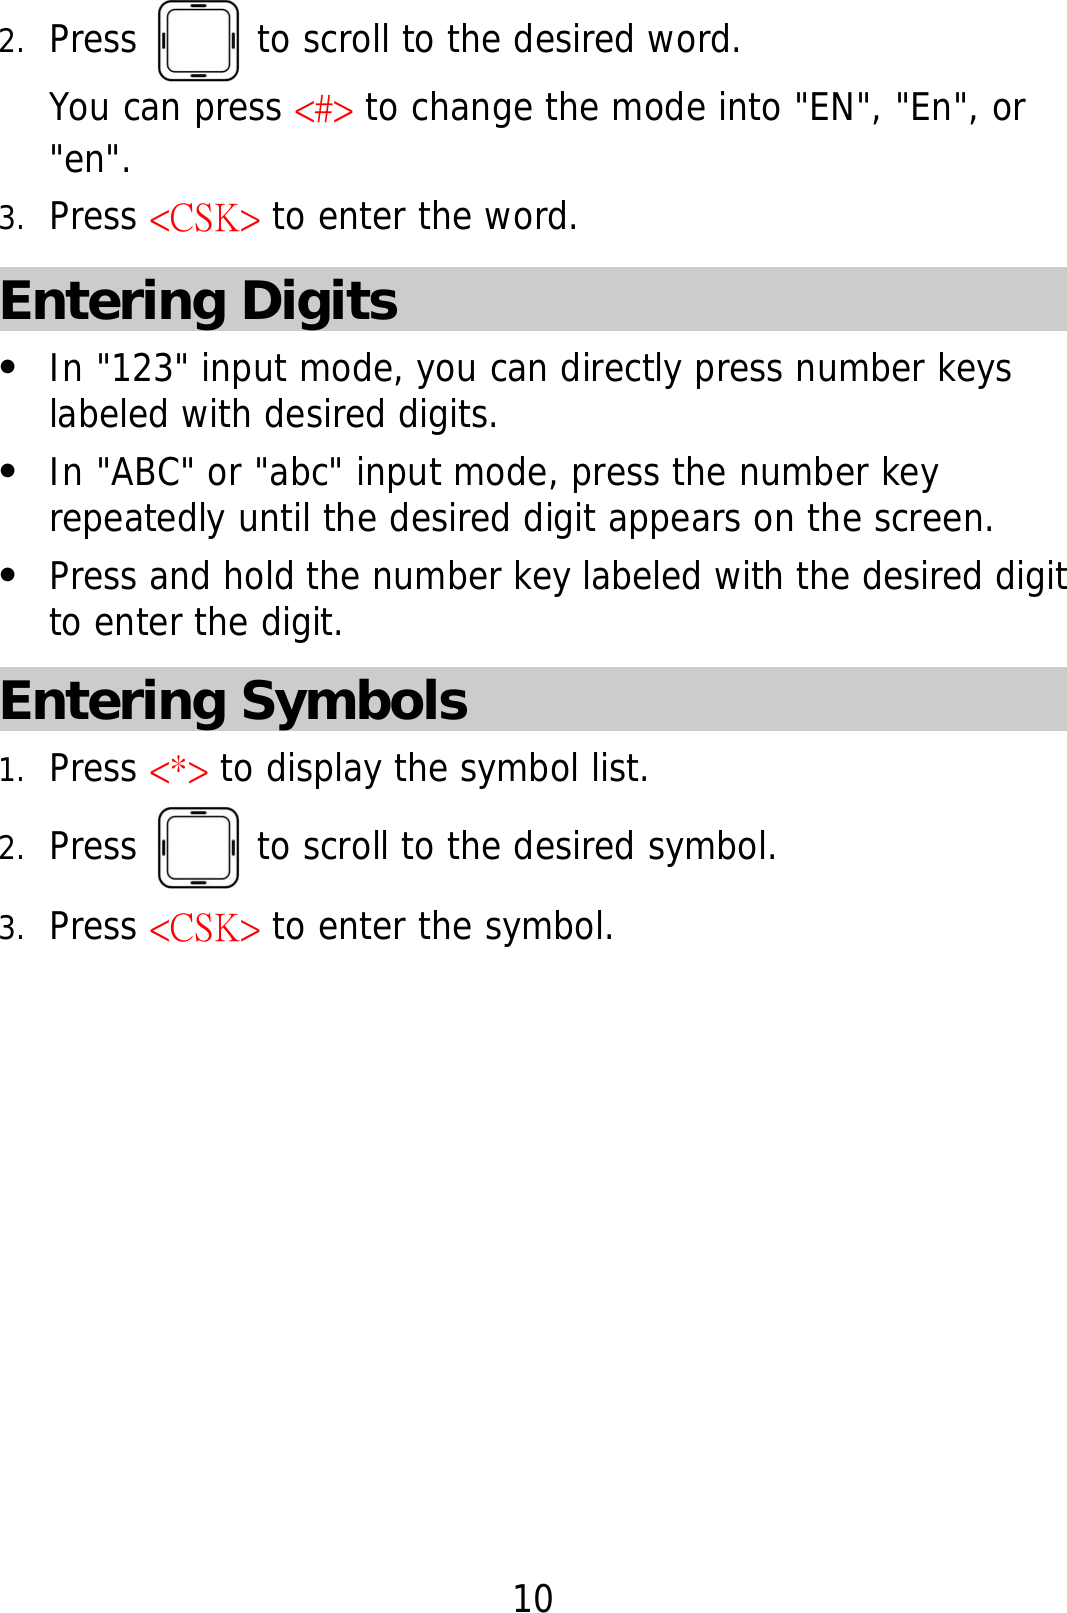 10 2. Press   to scroll to the desired word.  You can press &lt;#&gt; to change the mode into &quot;EN&quot;, &quot;En&quot;, or &quot;en&quot;. 3. Press &lt;CSK&gt; to enter the word. Entering Digits z In &quot;123&quot; input mode, you can directly press number keys labeled with desired digits. z In &quot;ABC&quot; or &quot;abc&quot; input mode, press the number key repeatedly until the desired digit appears on the screen. z Press and hold the number key labeled with the desired digit to enter the digit. Entering Symbols 1. Press &lt;*&gt; to display the symbol list. 2. Press   to scroll to the desired symbol. 3. Press &lt;CSK&gt; to enter the symbol. 